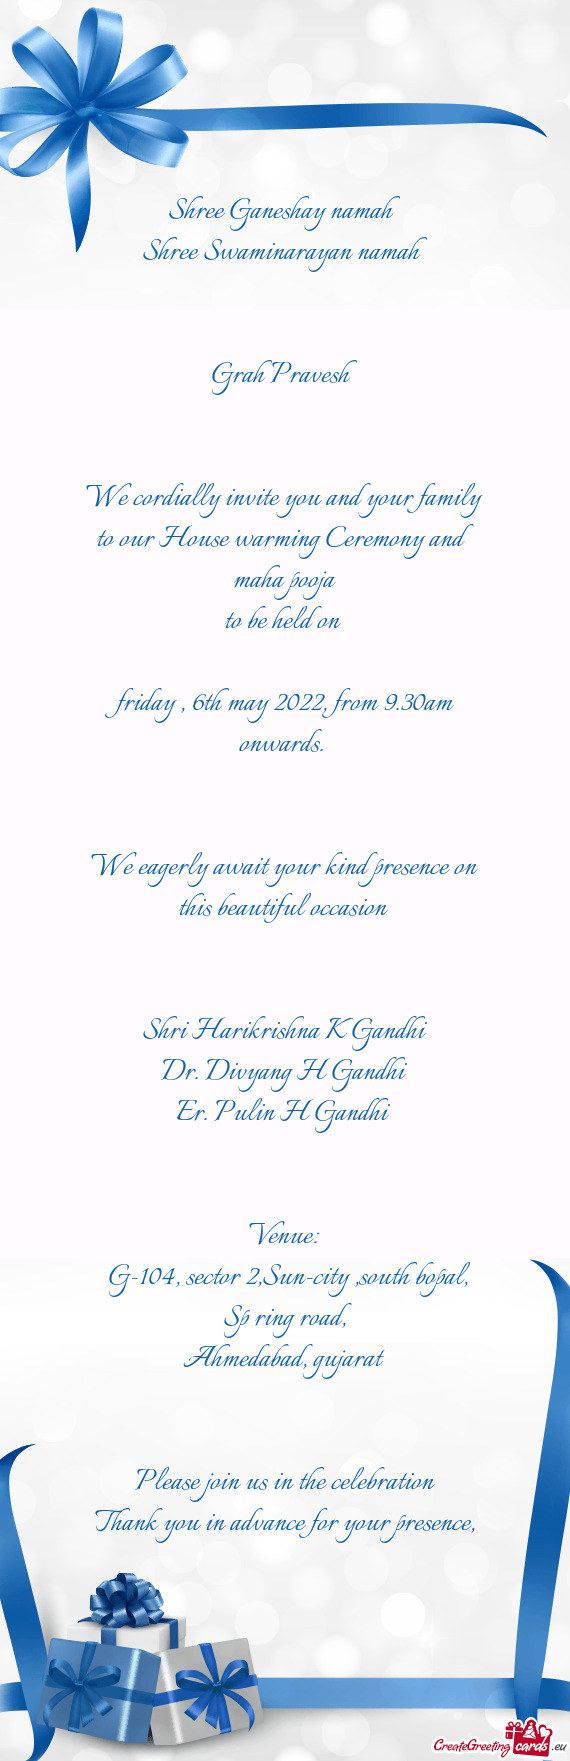 We cordially invite you and your family to our House warming Ceremony ...